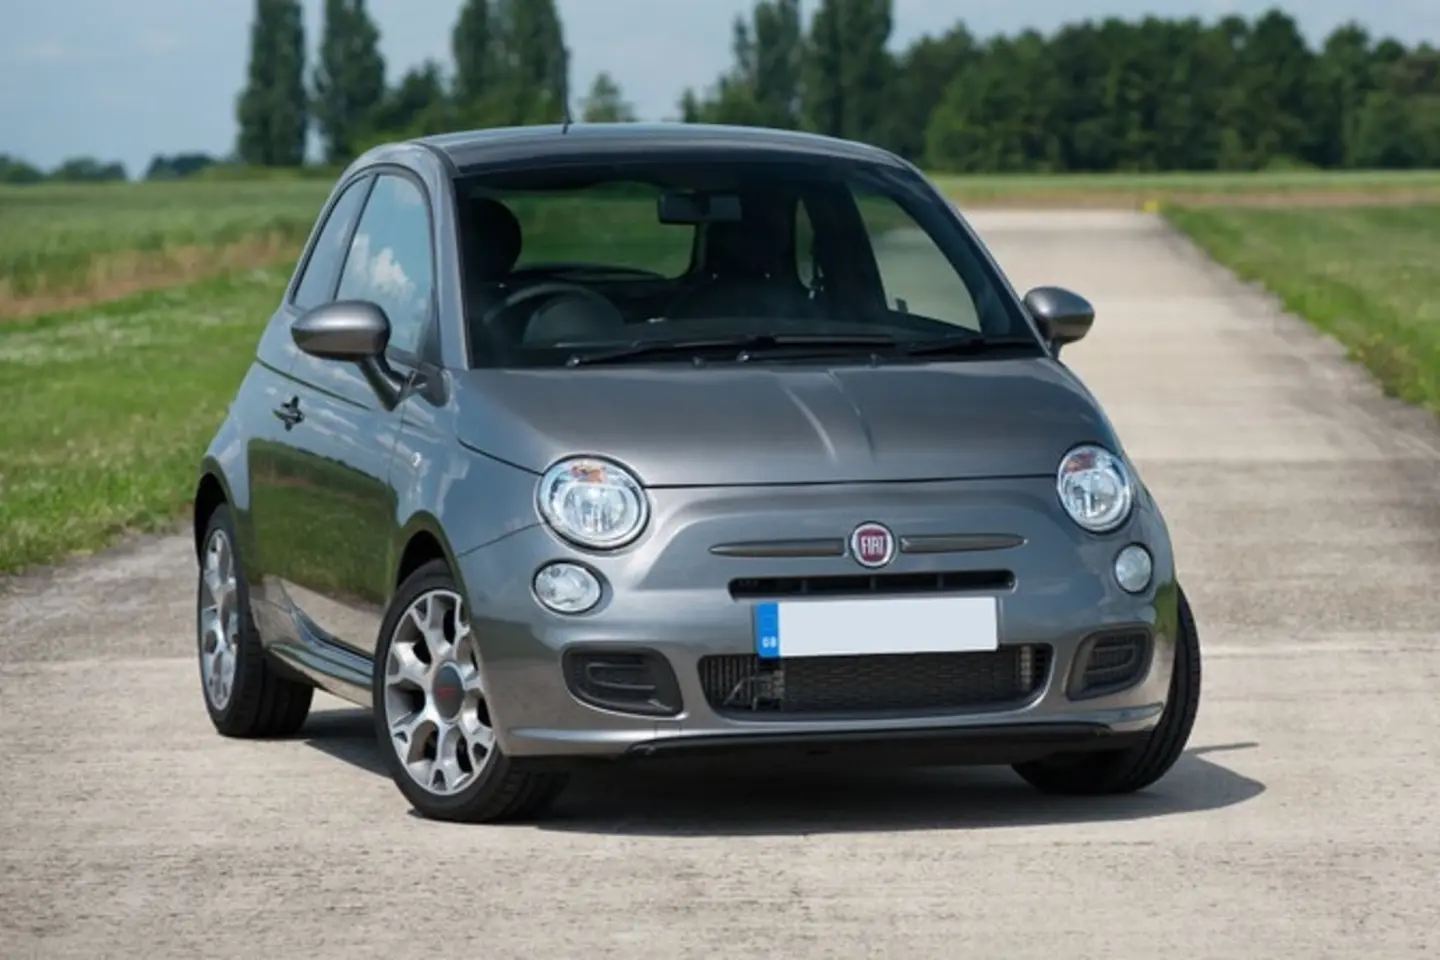 The exterior of a grey Fiat 500